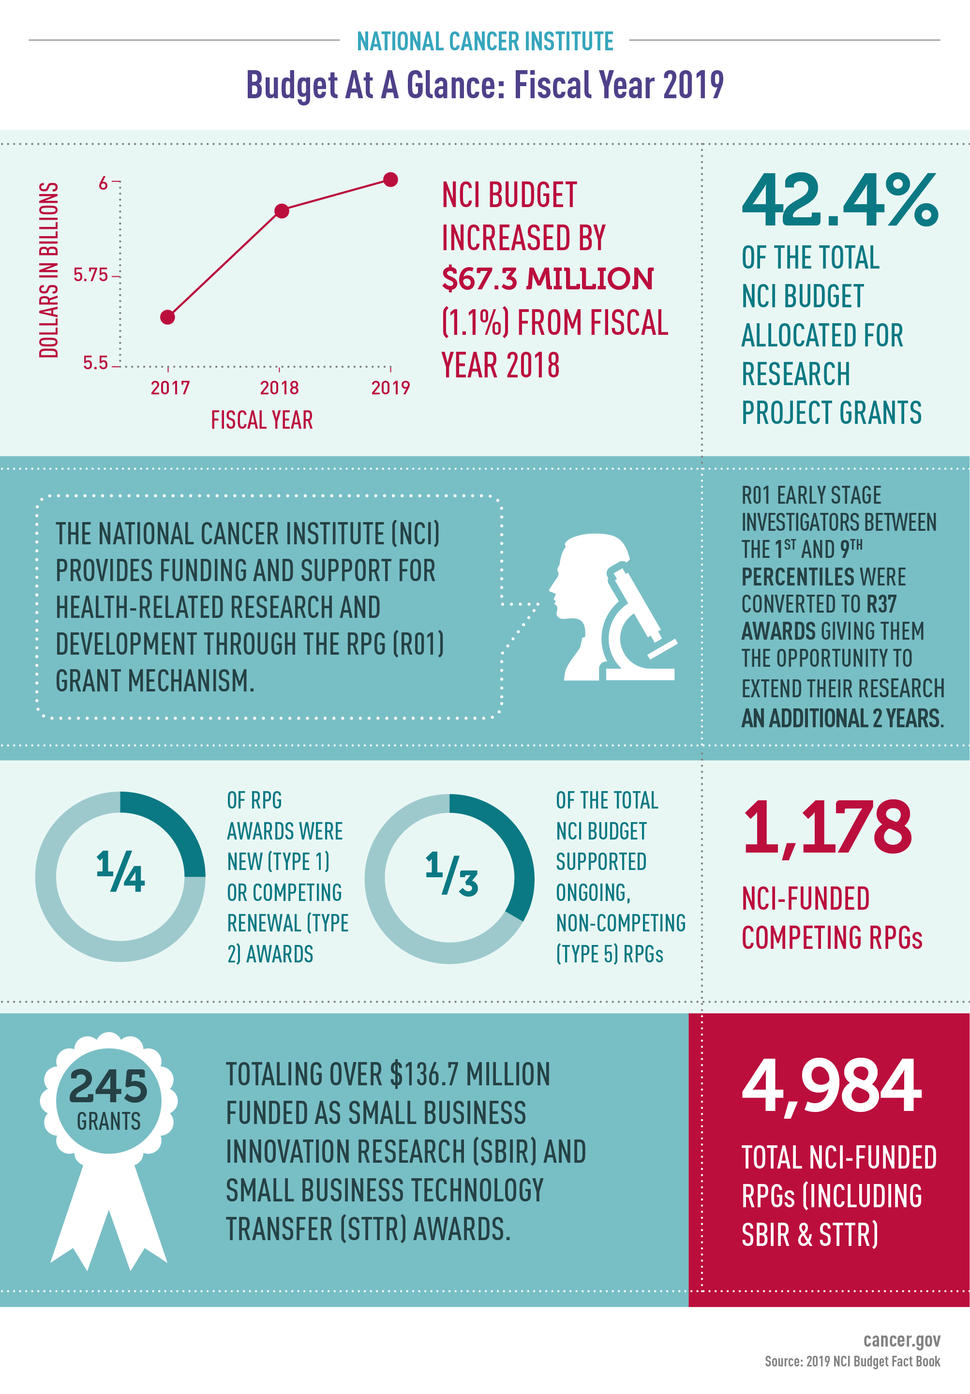 Infographic for National Cancer Institute - Budget At A Glance: Fiscal Year 2019. An increase of $67.3M. 42.4% allocated for research project grants. Support and funding for health-related research and development through the RPG (R01) grant mechanism.